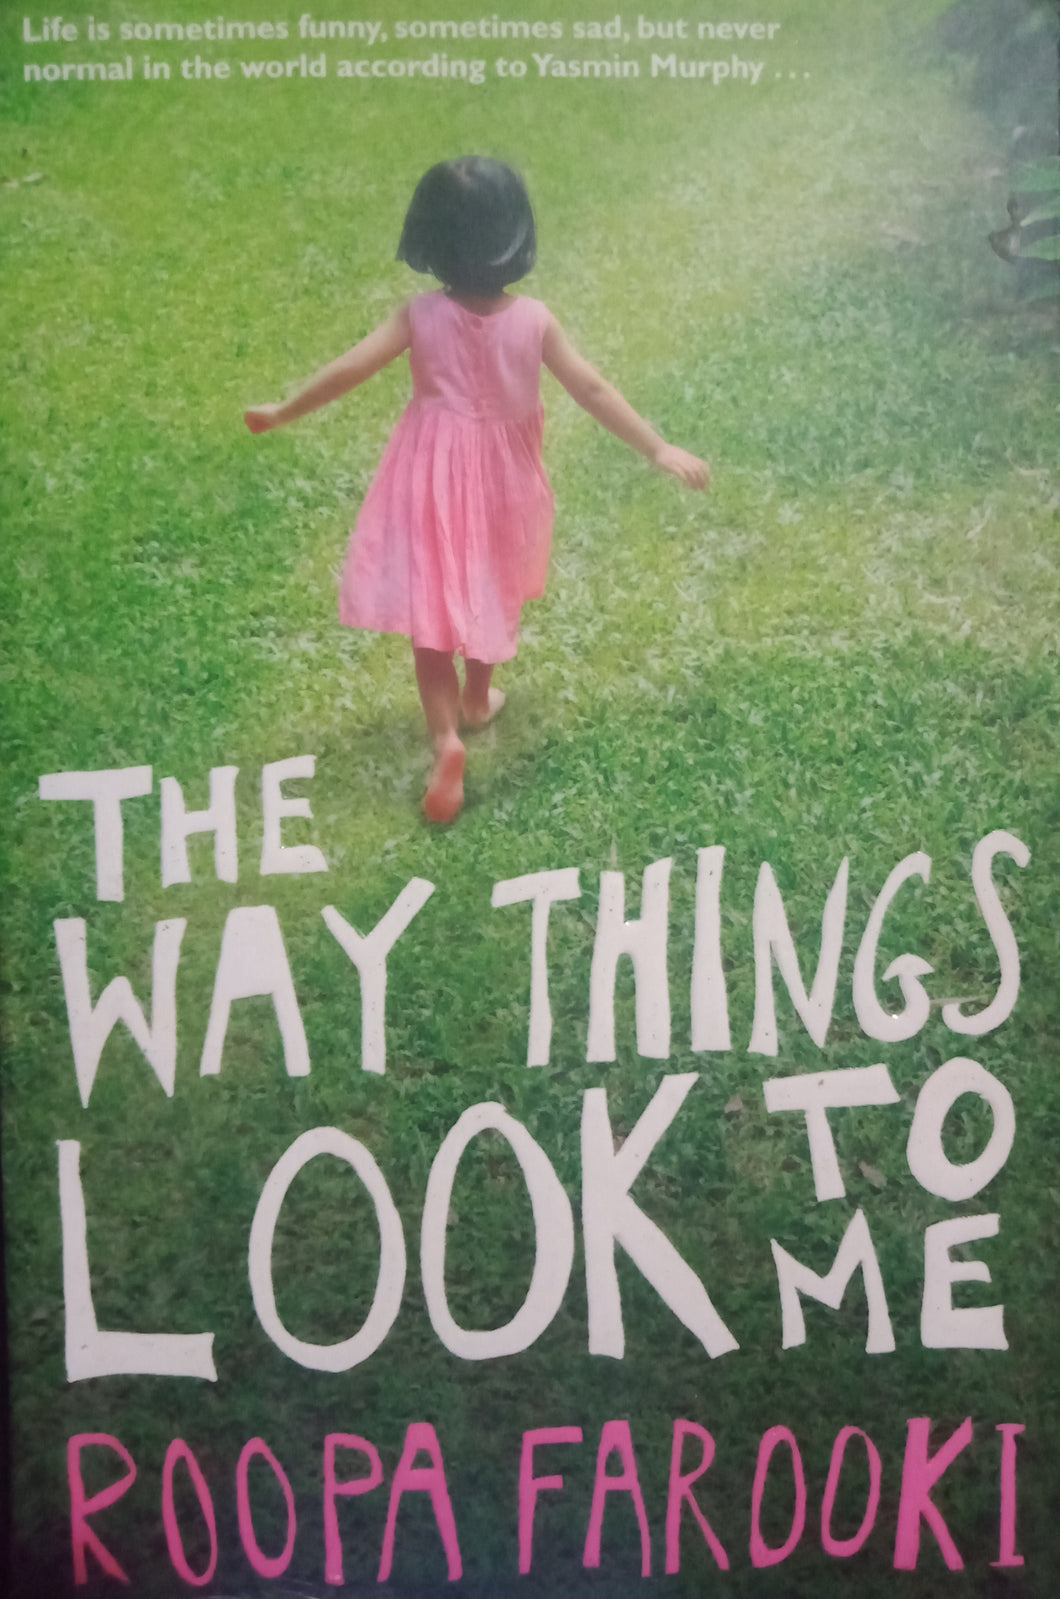 The Way things look to me By Roopa Farooki